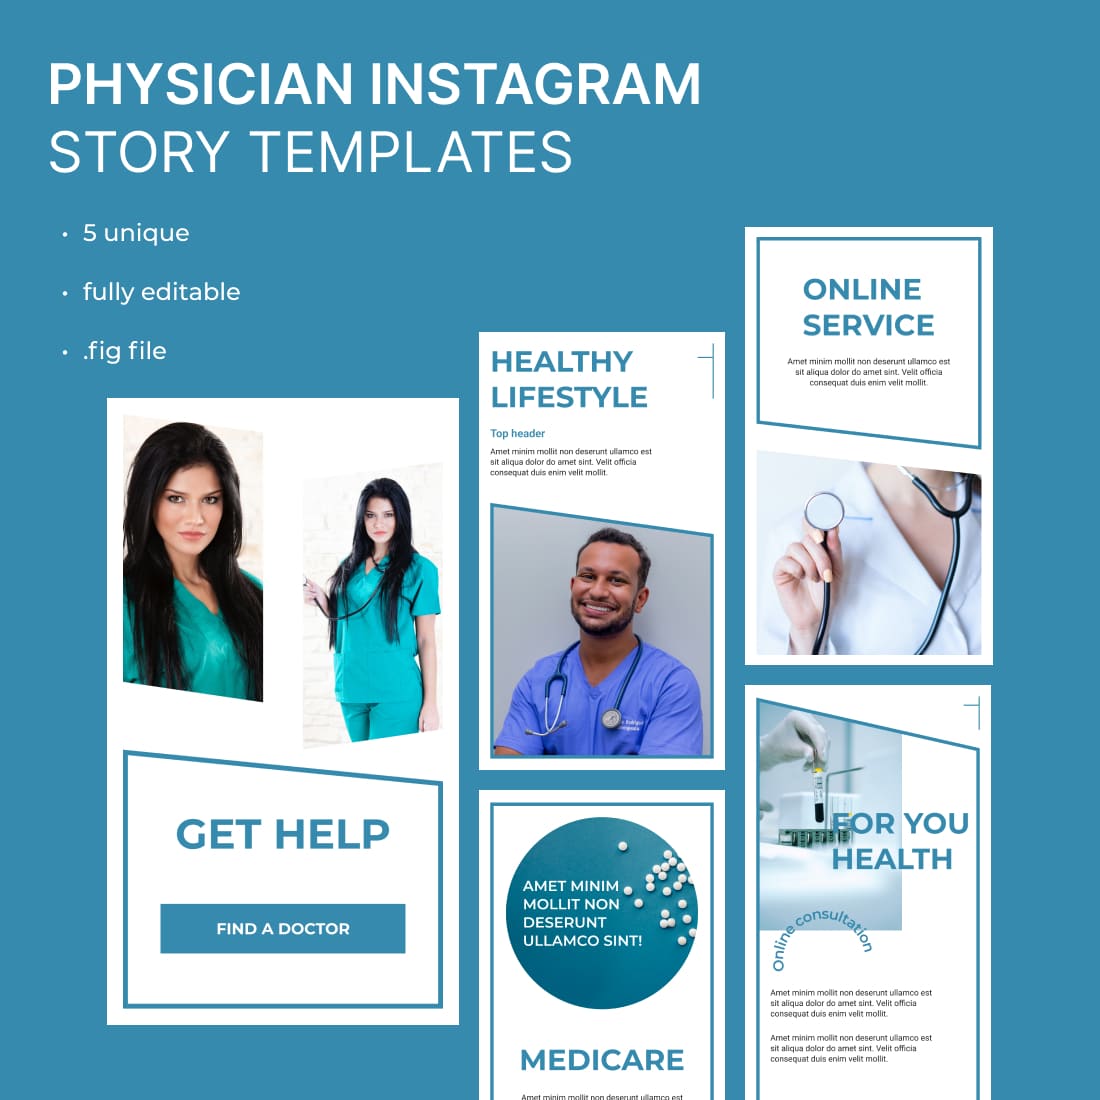 5 physician instagram Story templates.